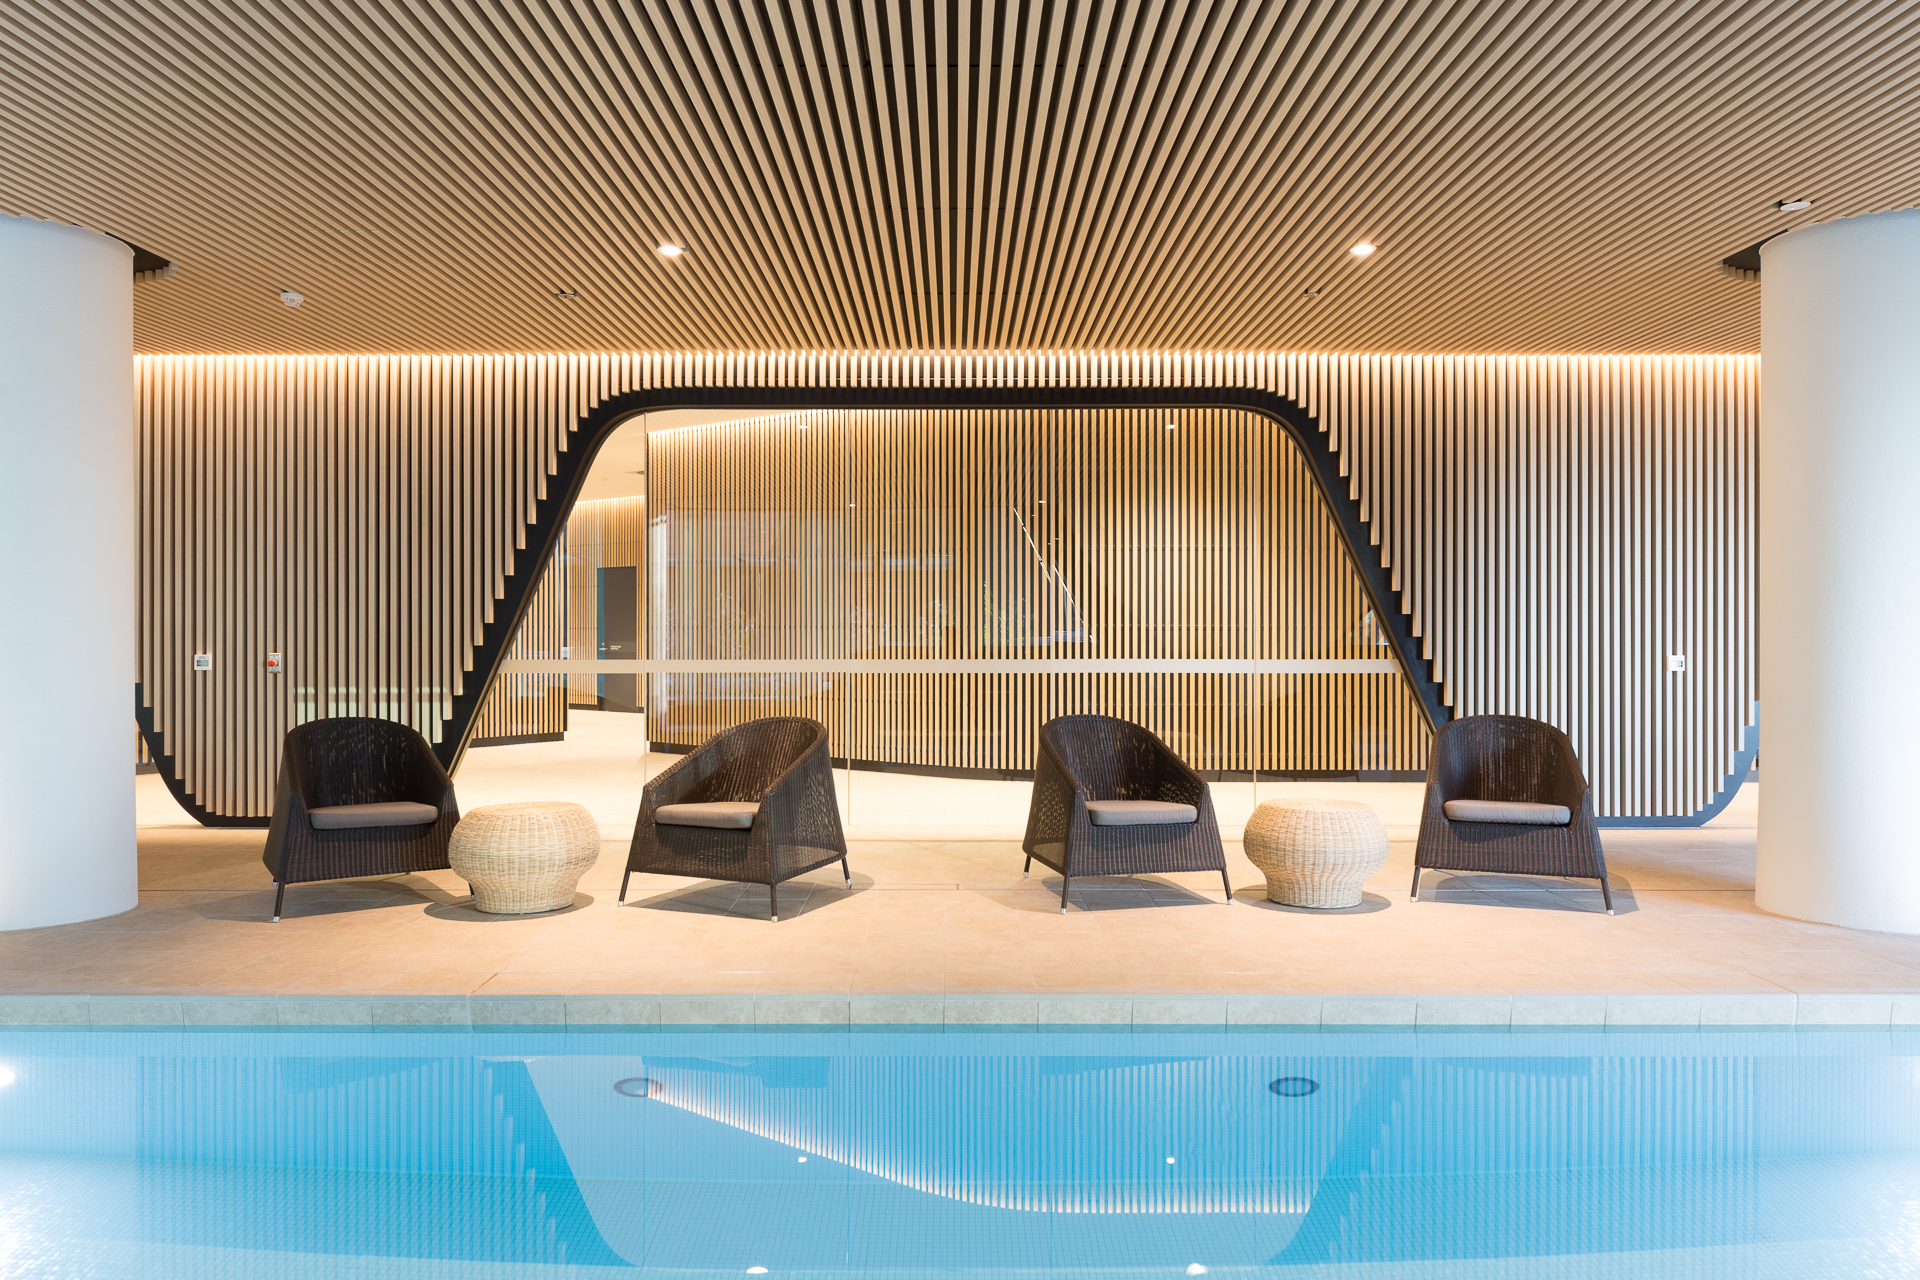 883 Collins St Multi-residential Pool Amenities - Melbourne VIC